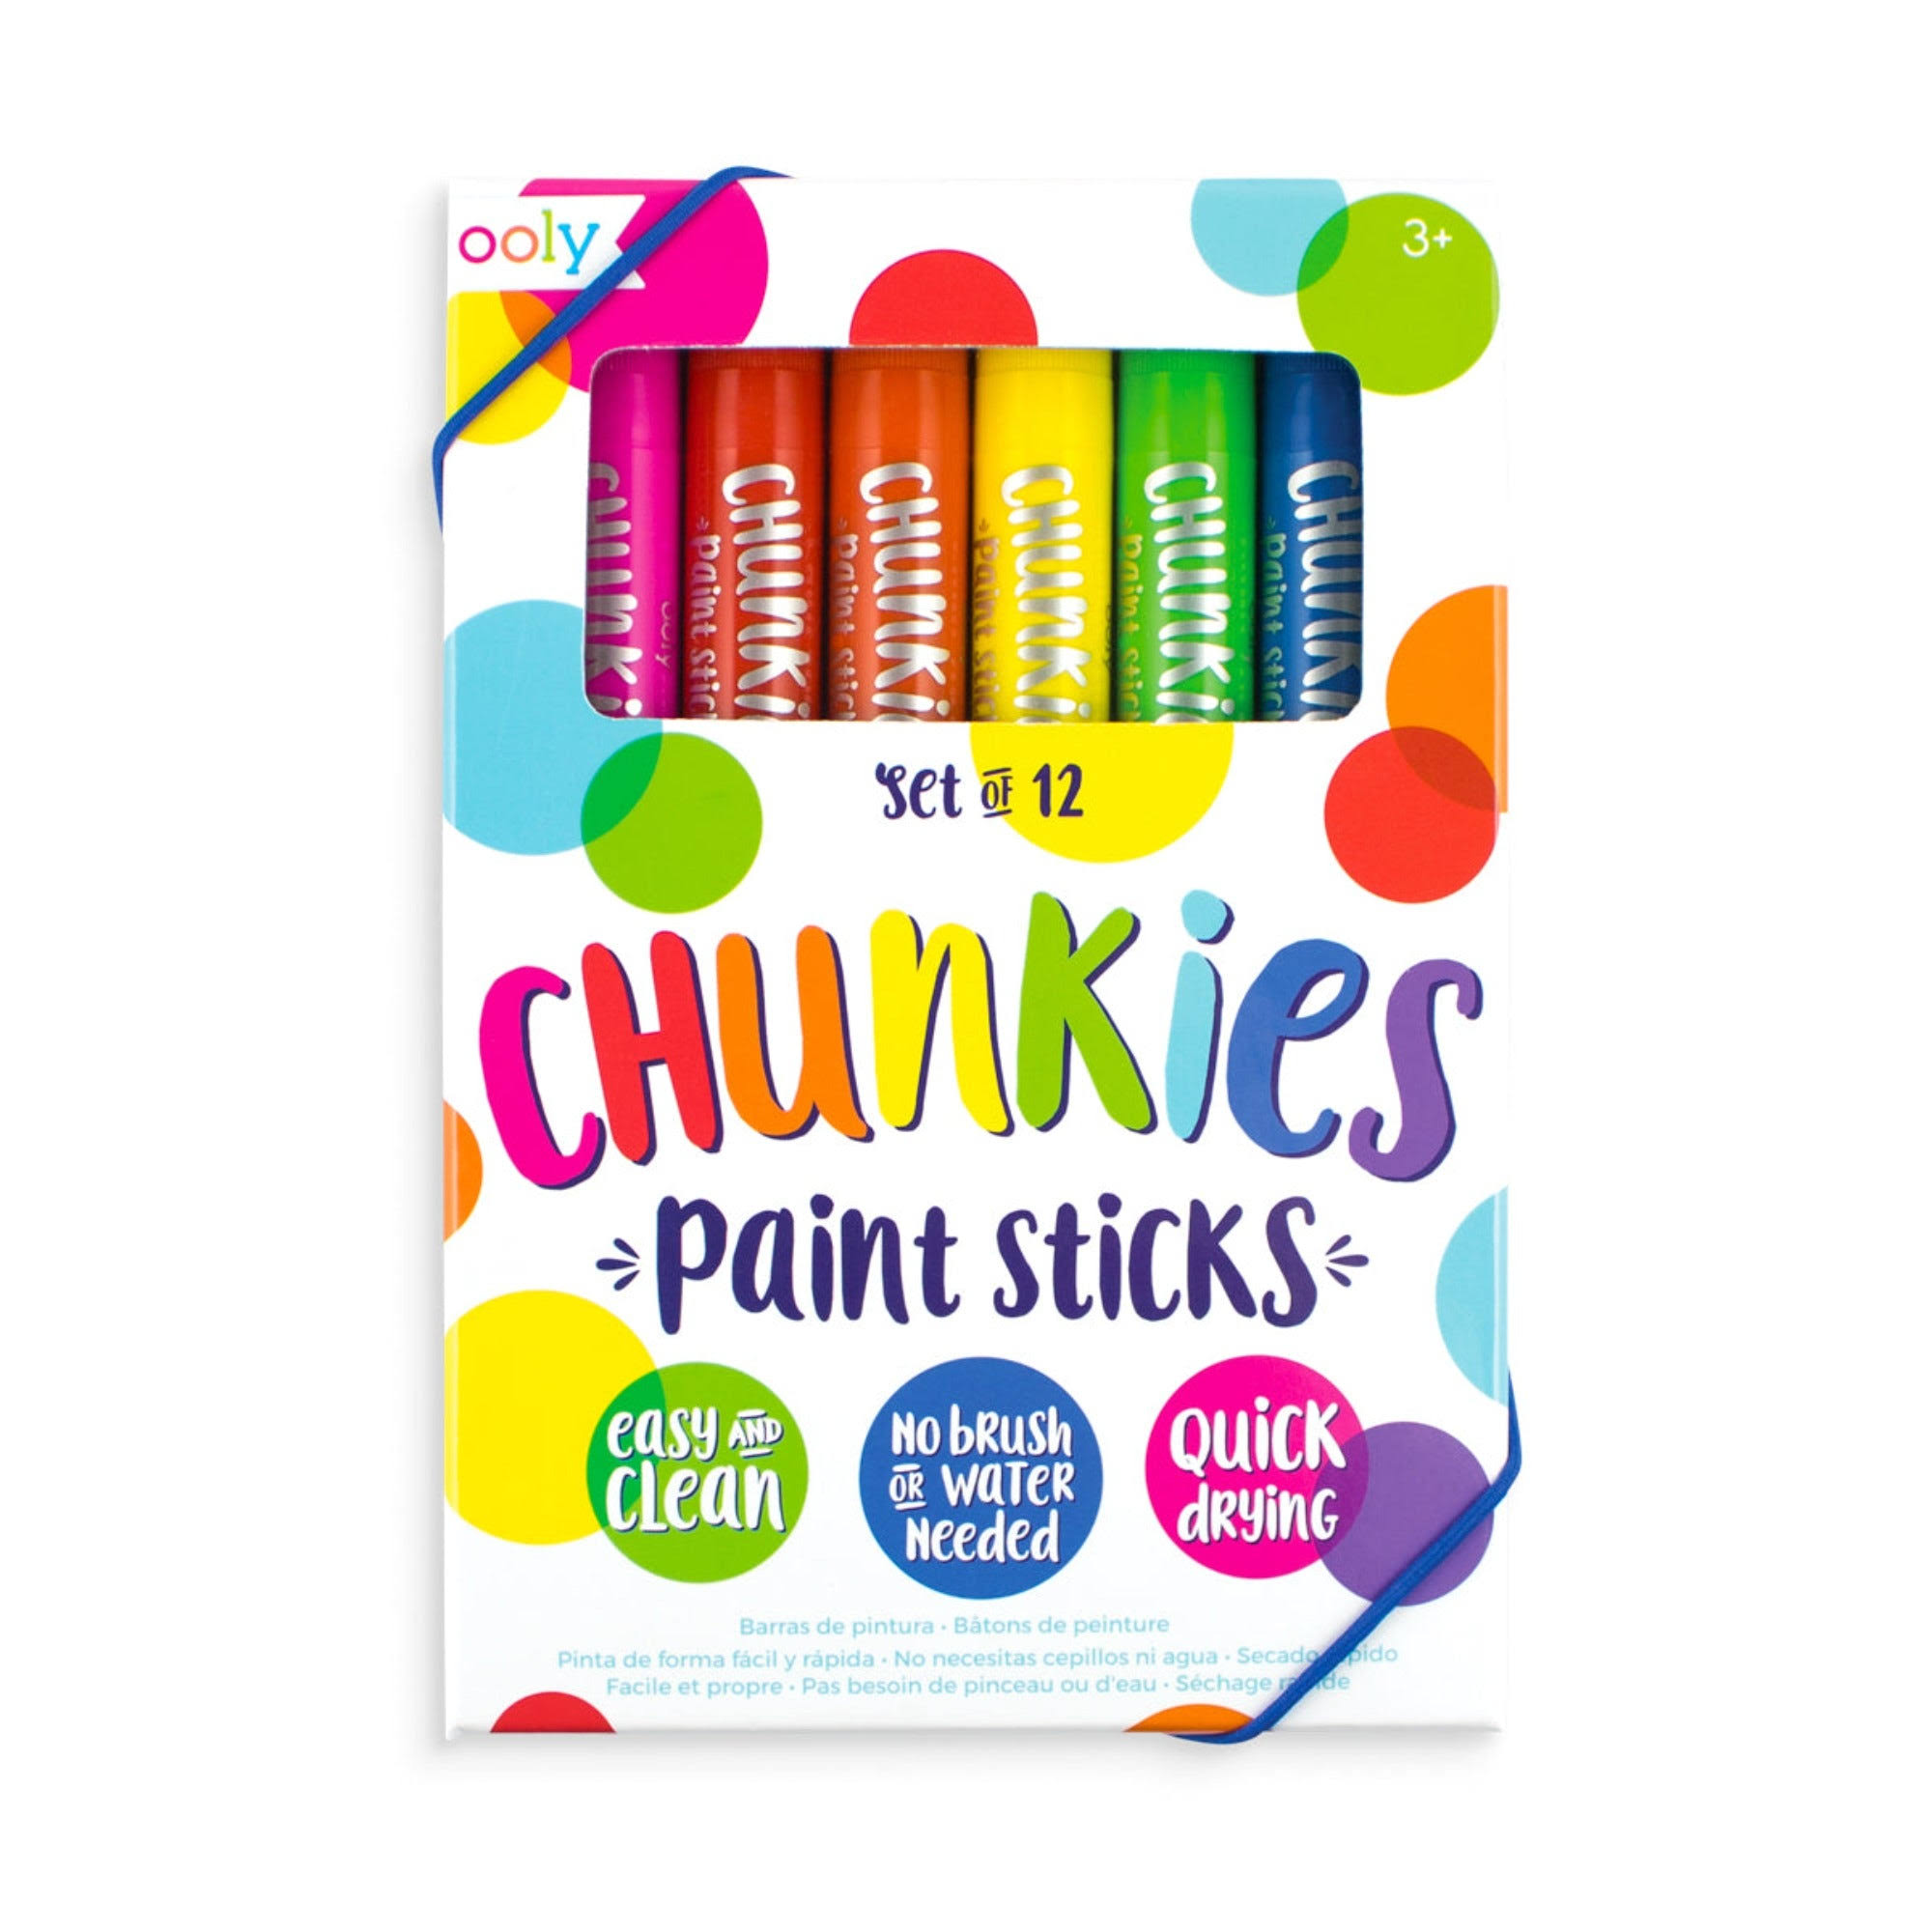 International Arrivals Is Now Newly Ooly Chunkies Paint Sticks - Set of 12